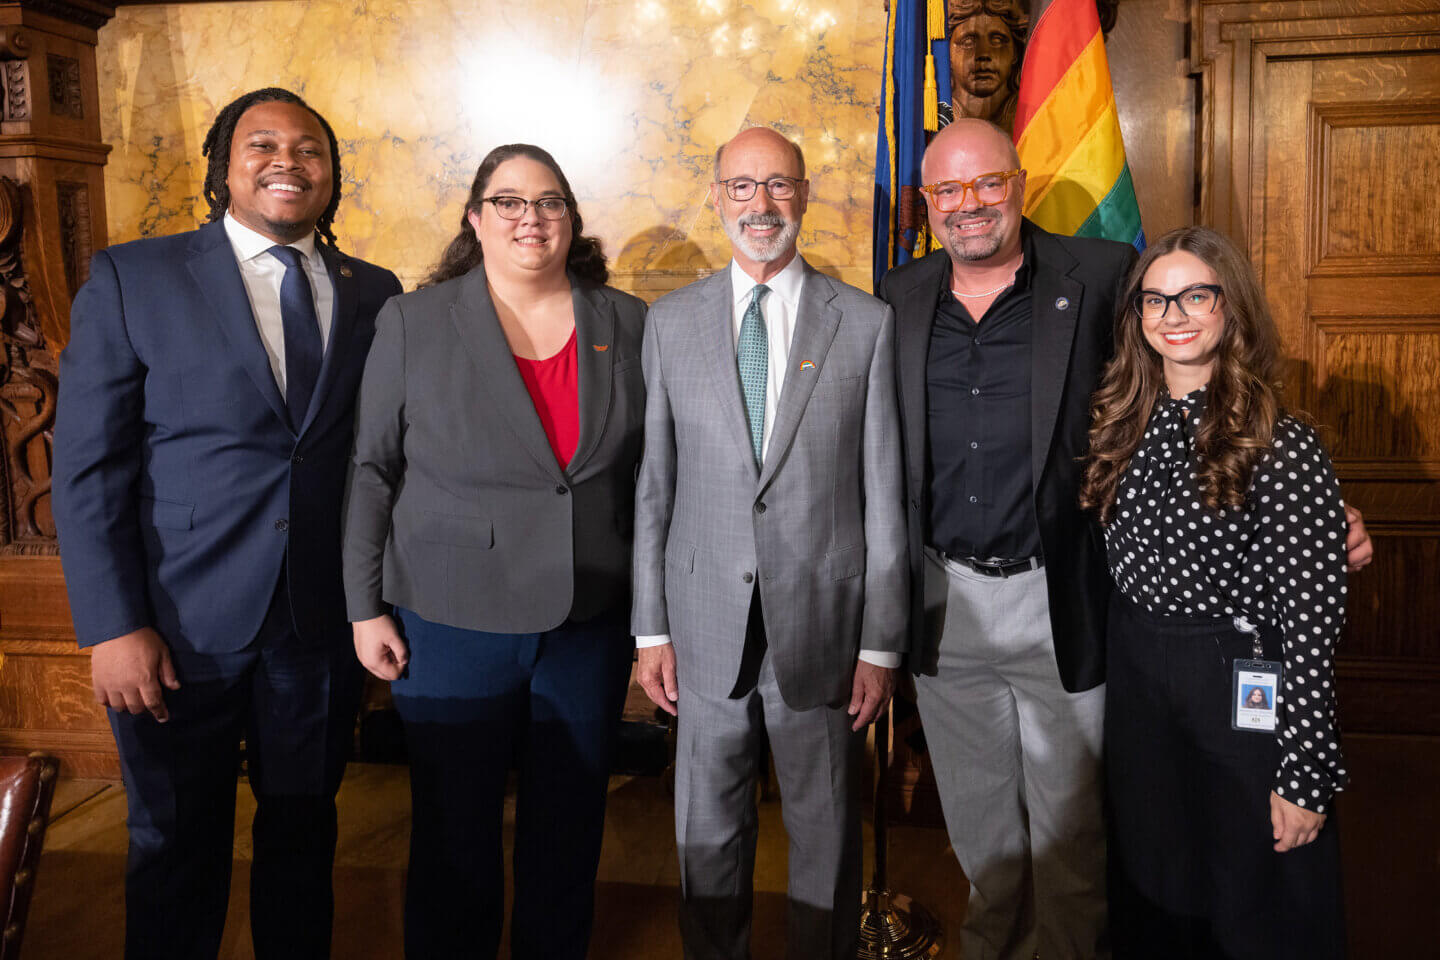 Pennsylvania Governor Tom Wolf with The Trevor Project staff.